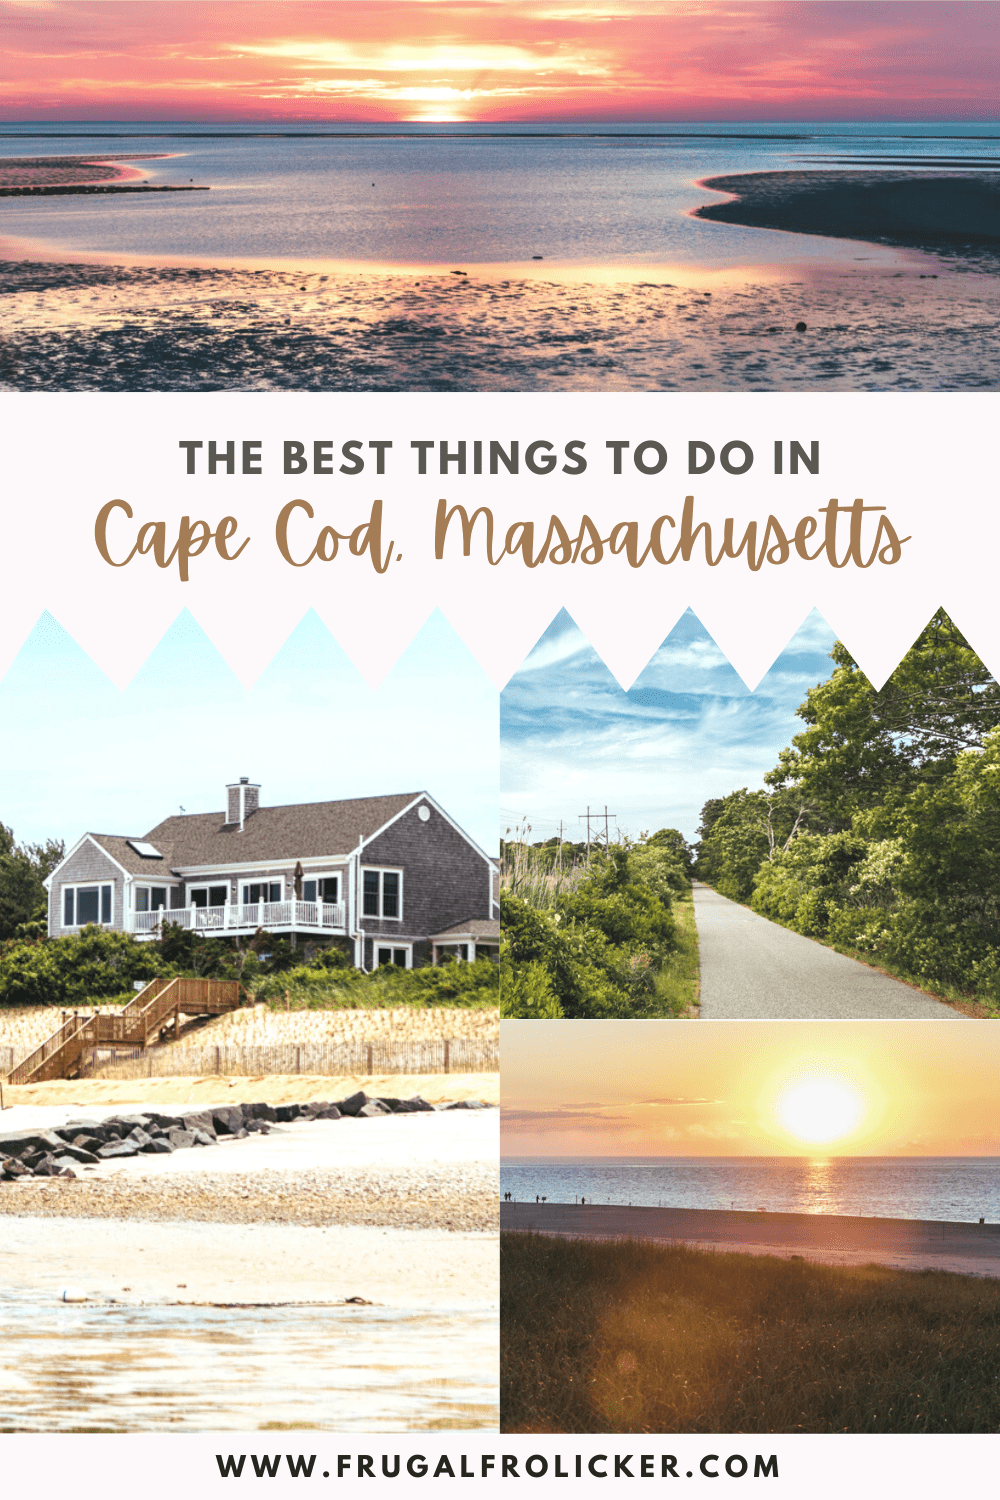 Best Things to do in Cape Cod, Massachusetts